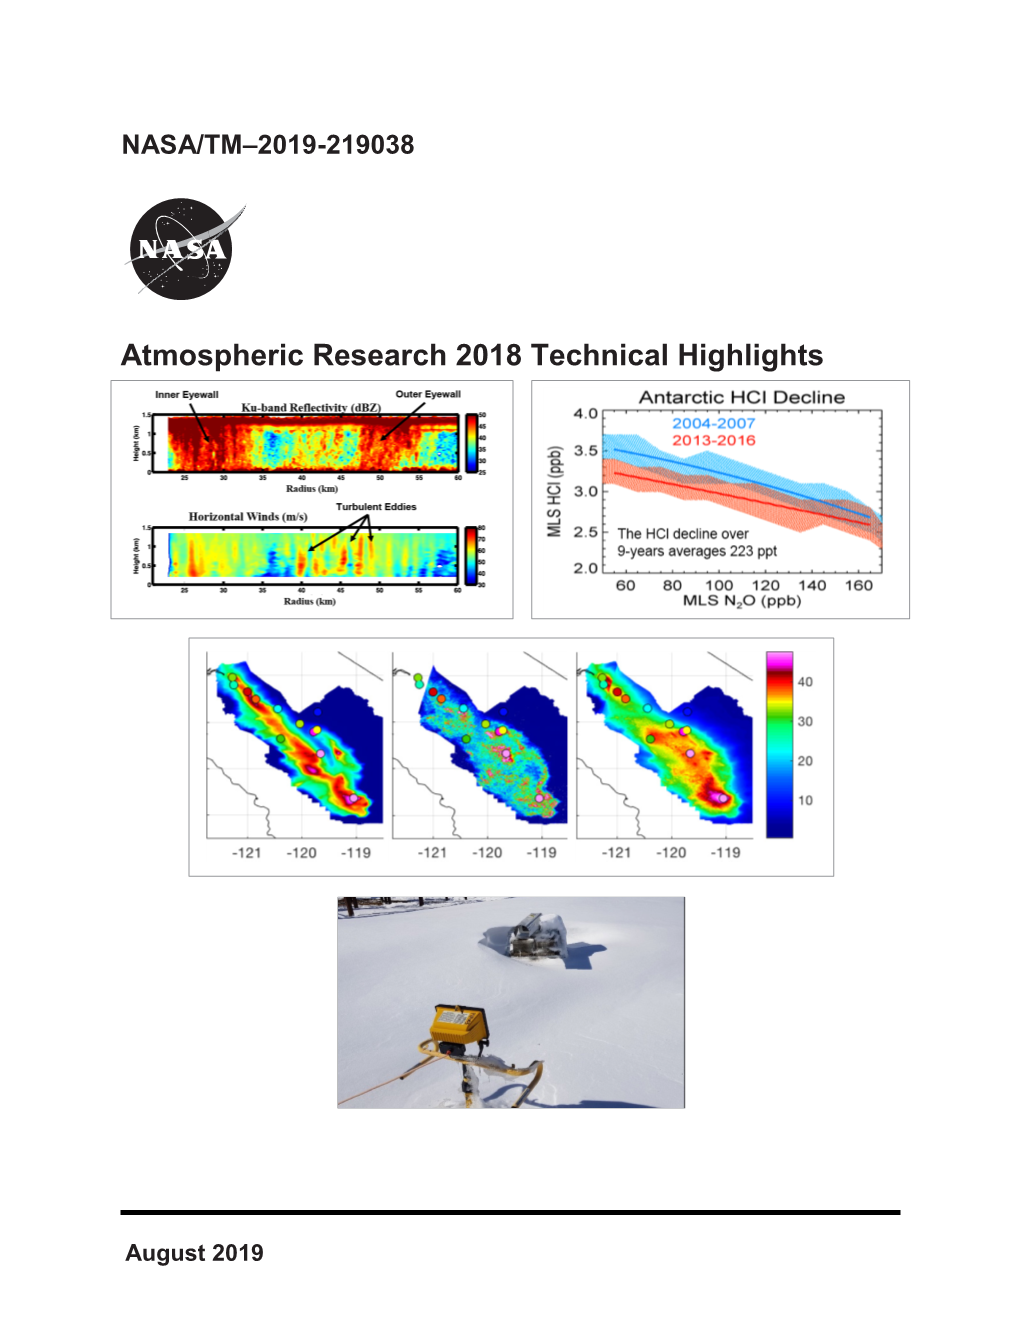 2018 Atmospheric Research Technical Highlights